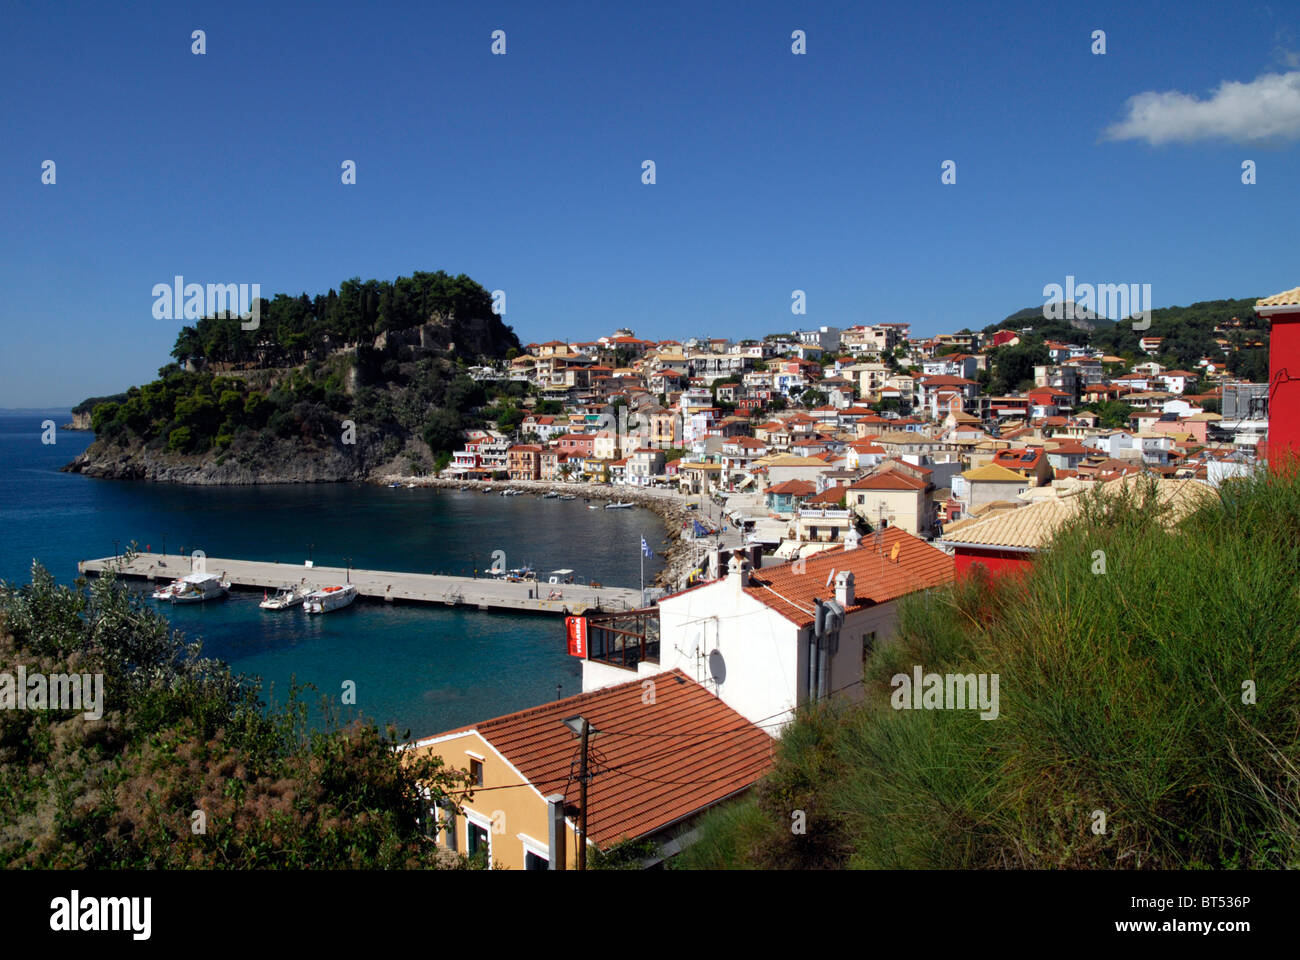 Parga, Epirus, Greece, showing the harbour, old town and Venetian Castle Stock Photo